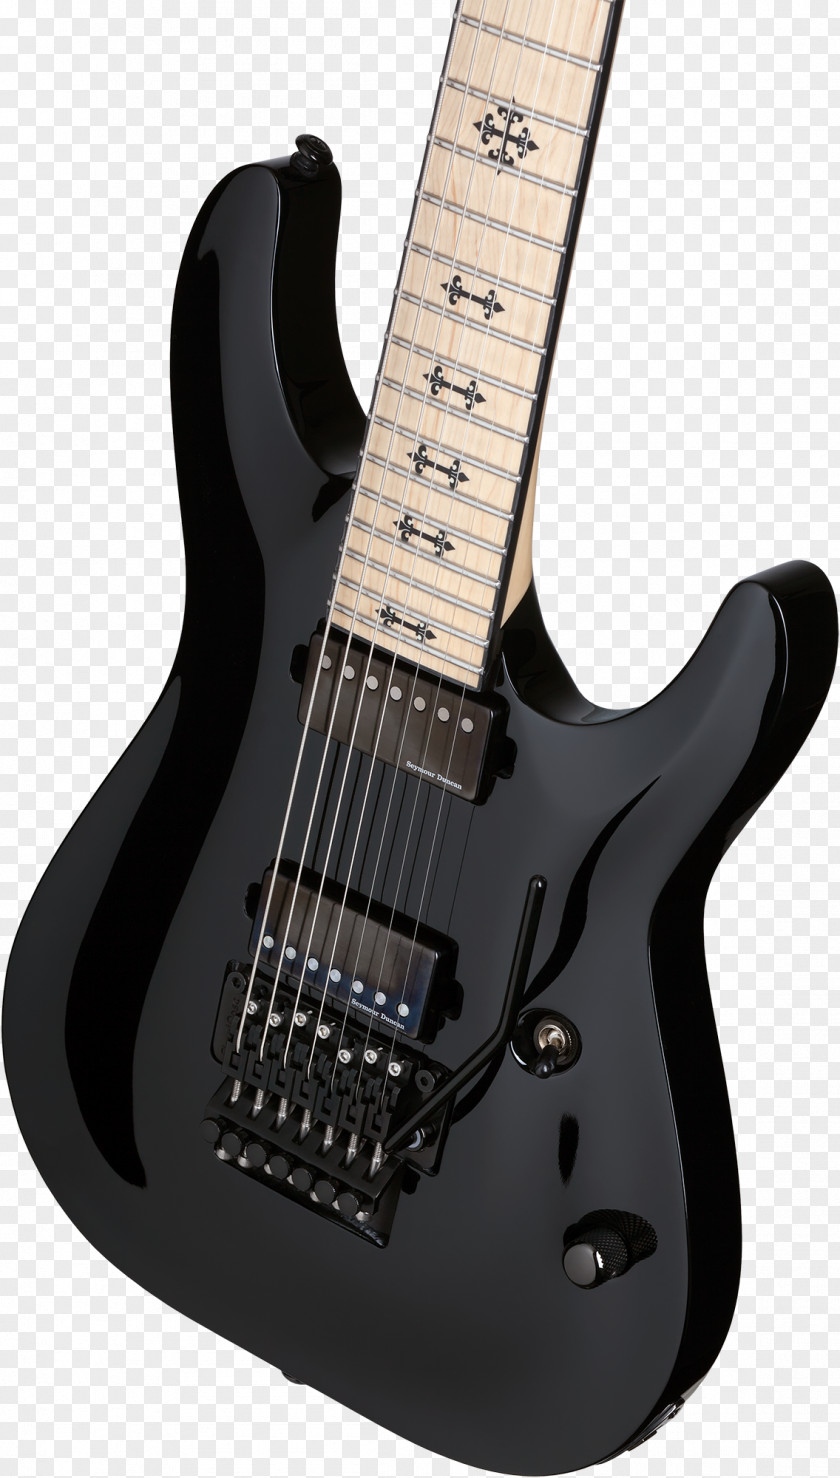 Bass Guitar Acoustic-electric Schecter Research PNG